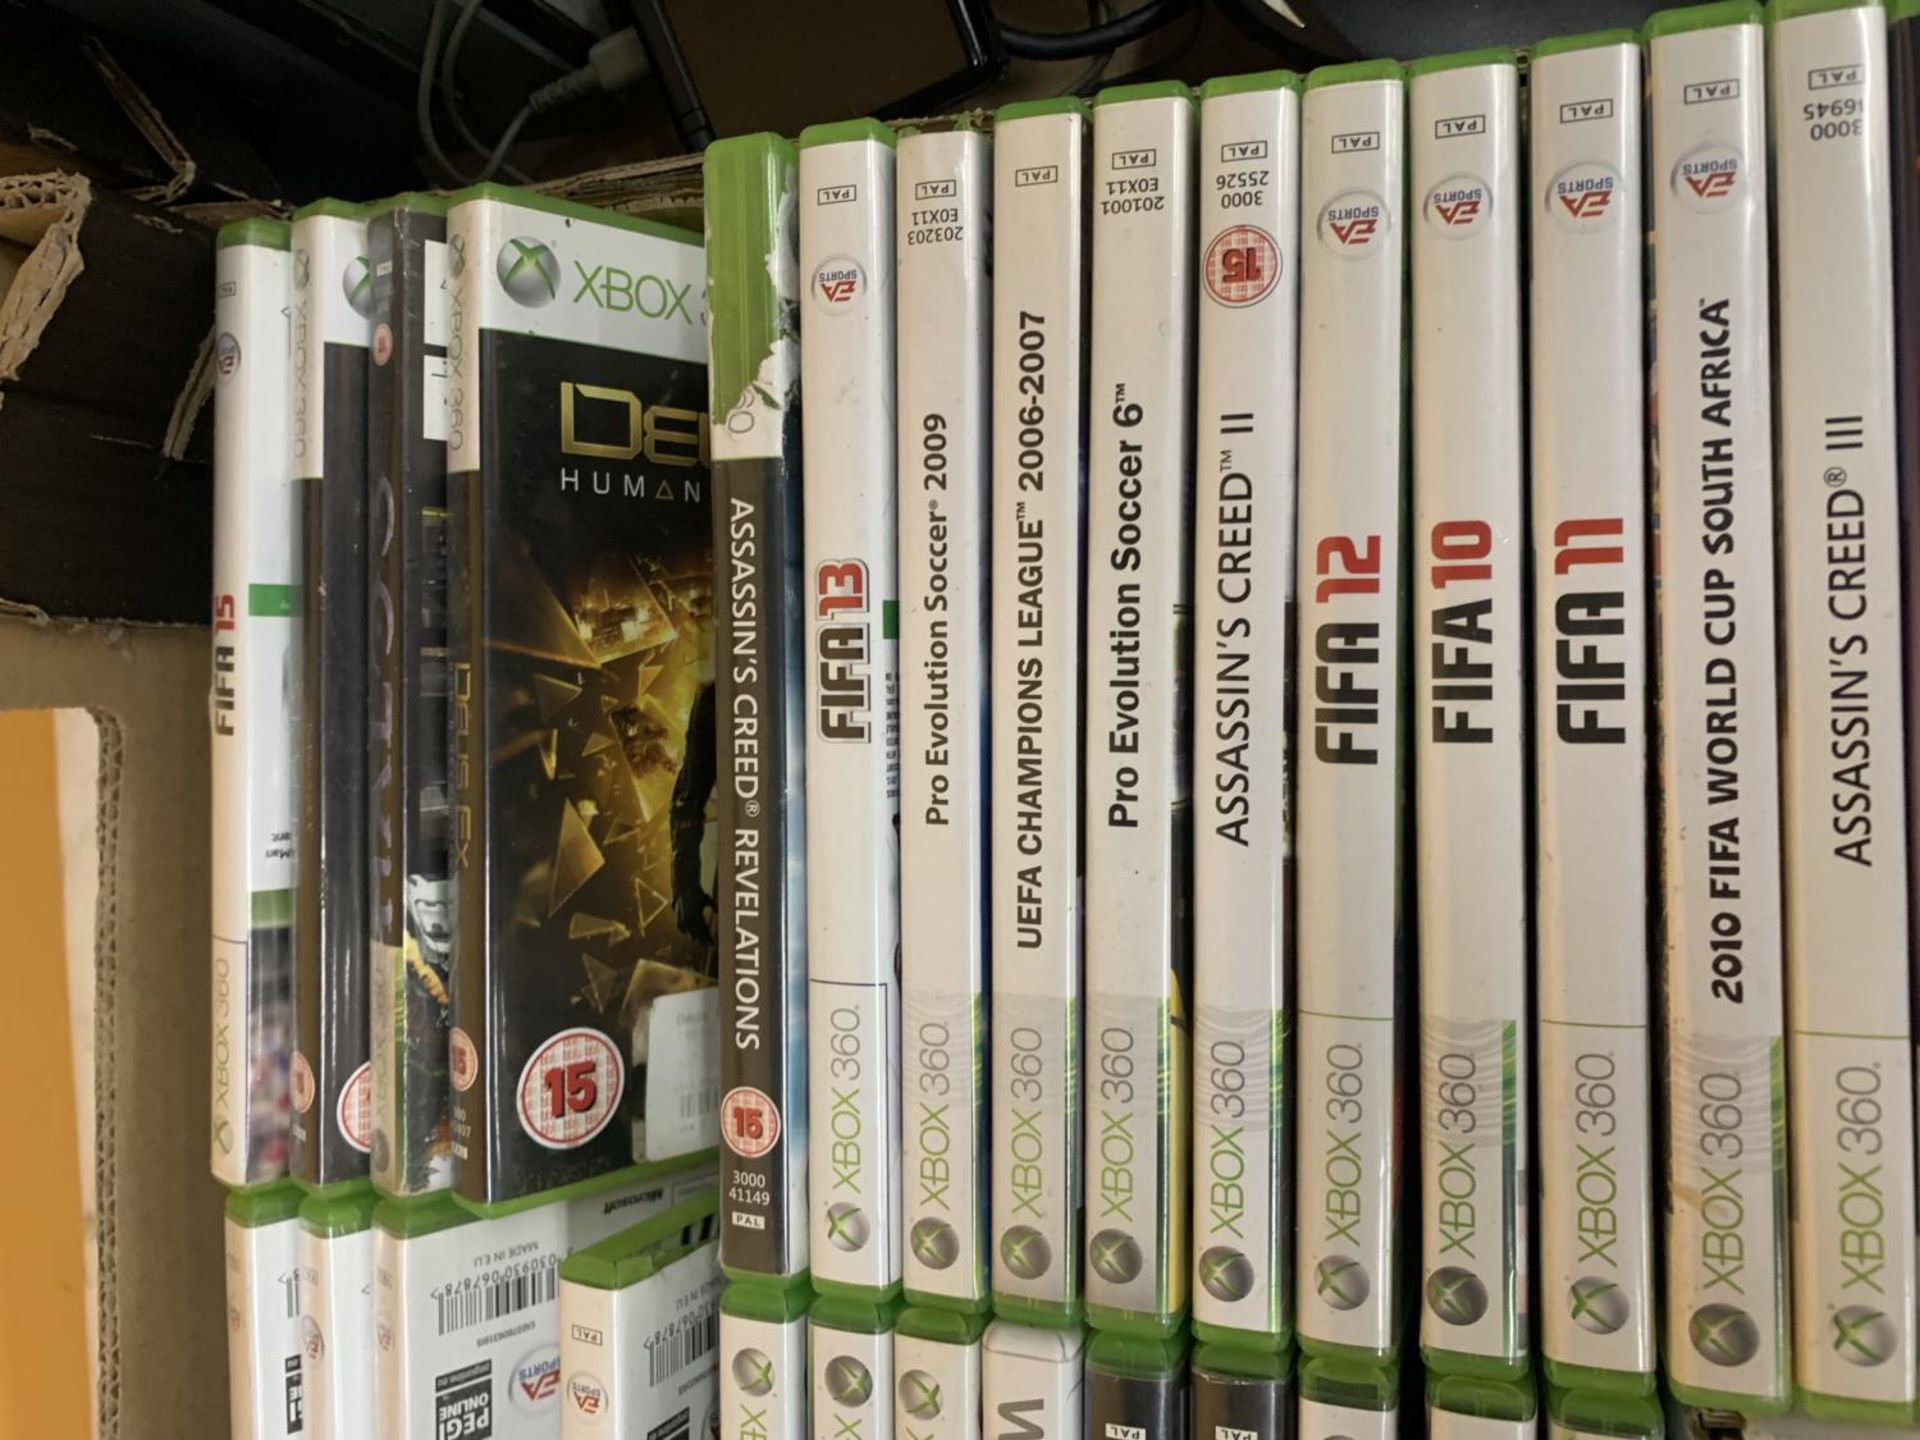 A QUANTITY OF XBOX 360 GAMES AND DVD PLAYER TO INCLUDE FIFA, HALO ETC - Image 3 of 5